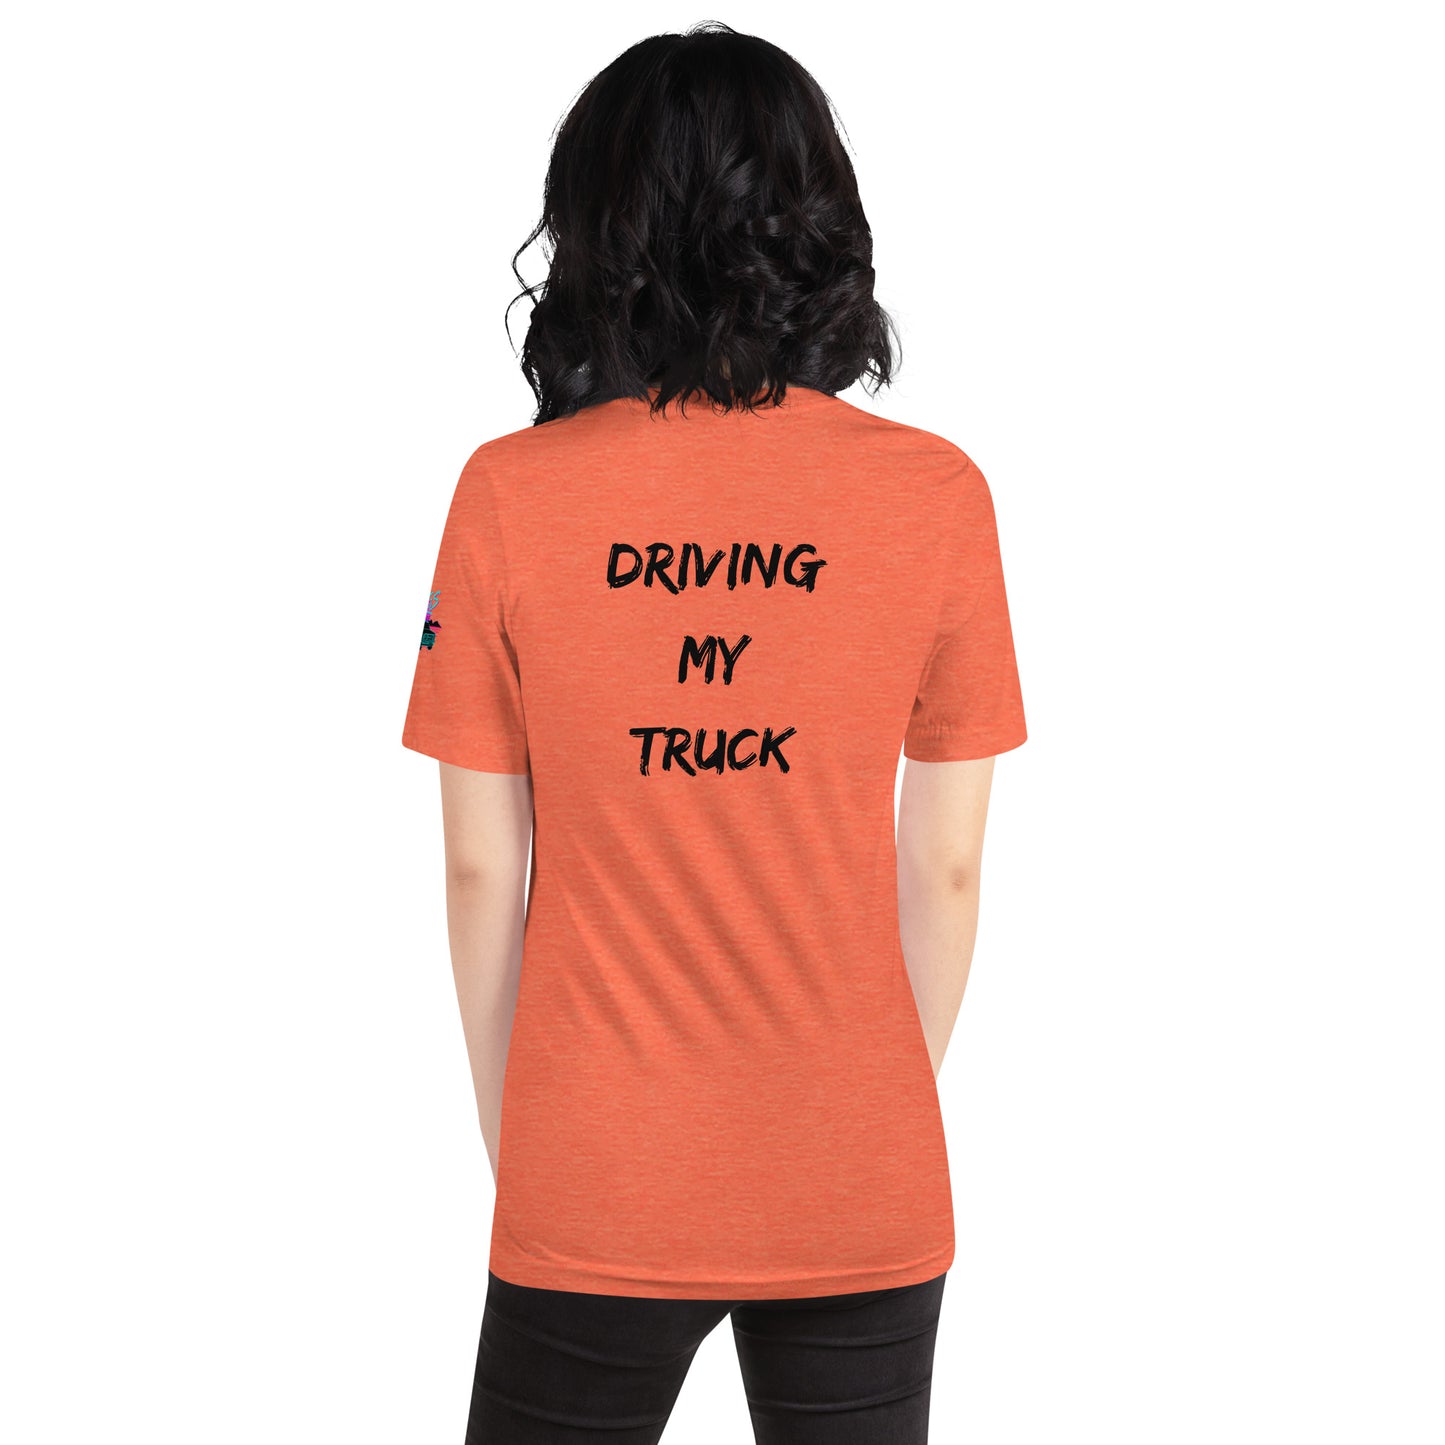 I'm Busy Driving My Truck Unisex Soft T-shirt